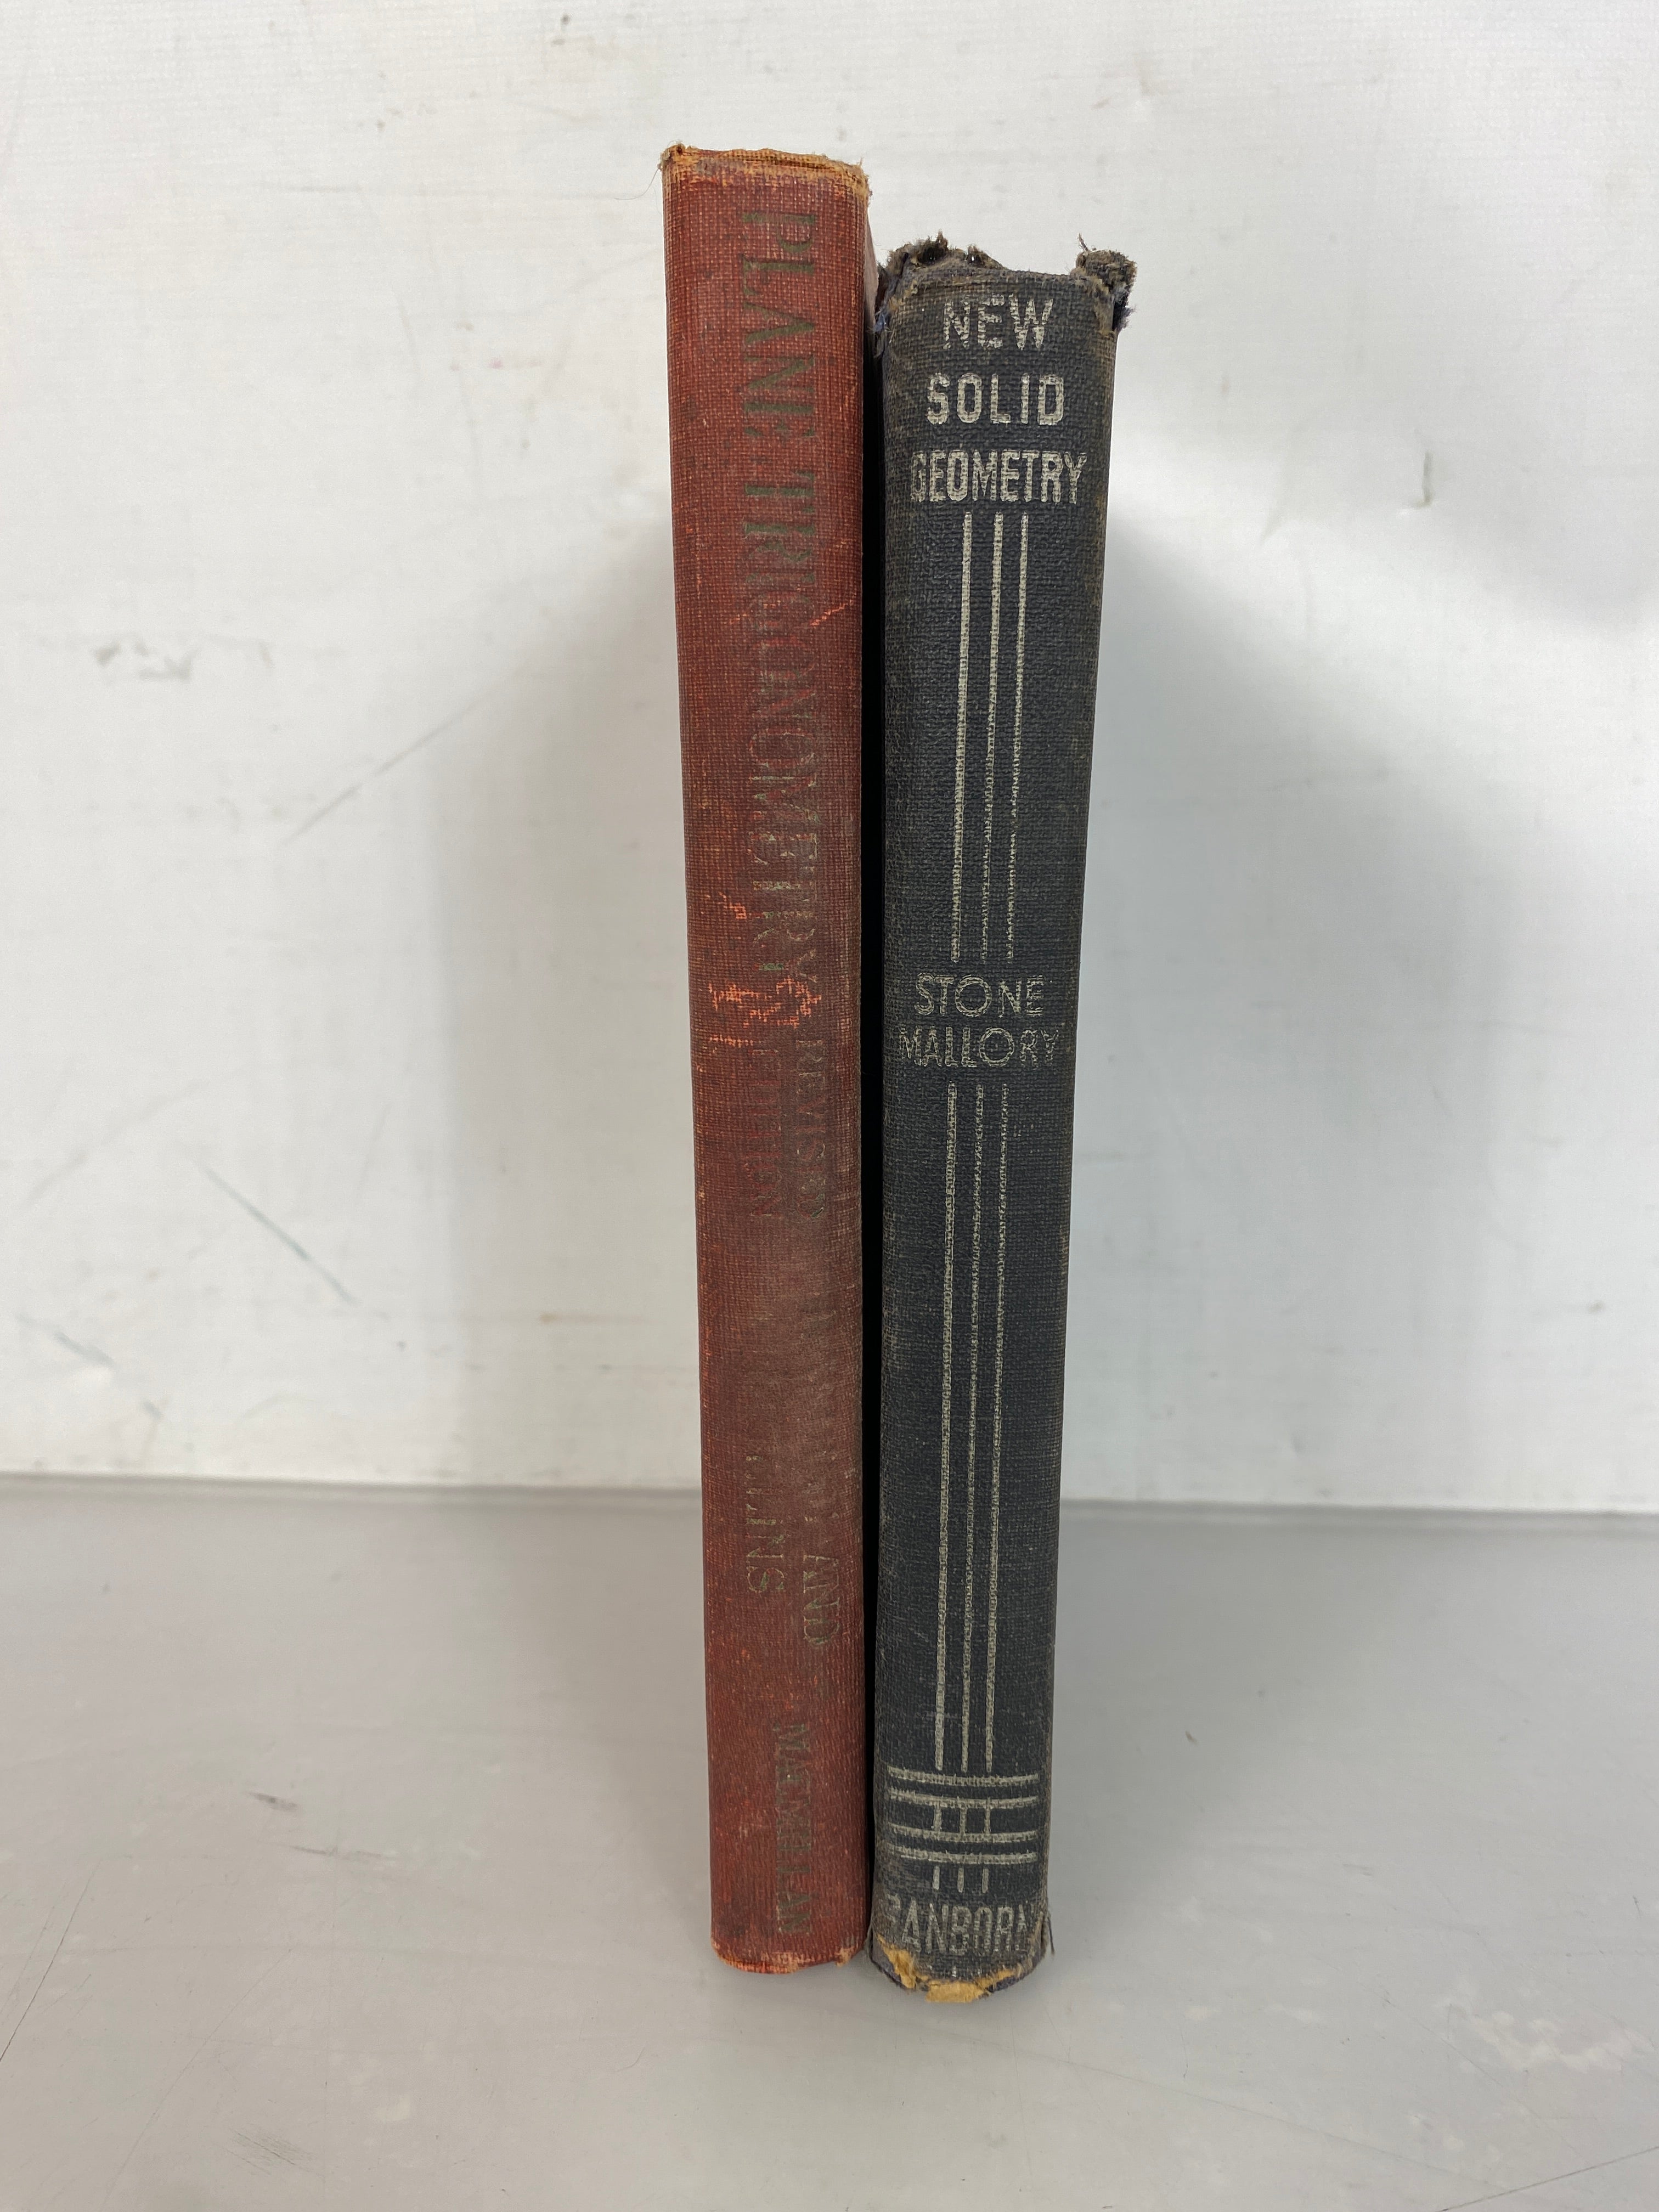 Lot of 2 Vintage Math Texts: New Solid Geometry and Plane Trigonometry (1937) HC